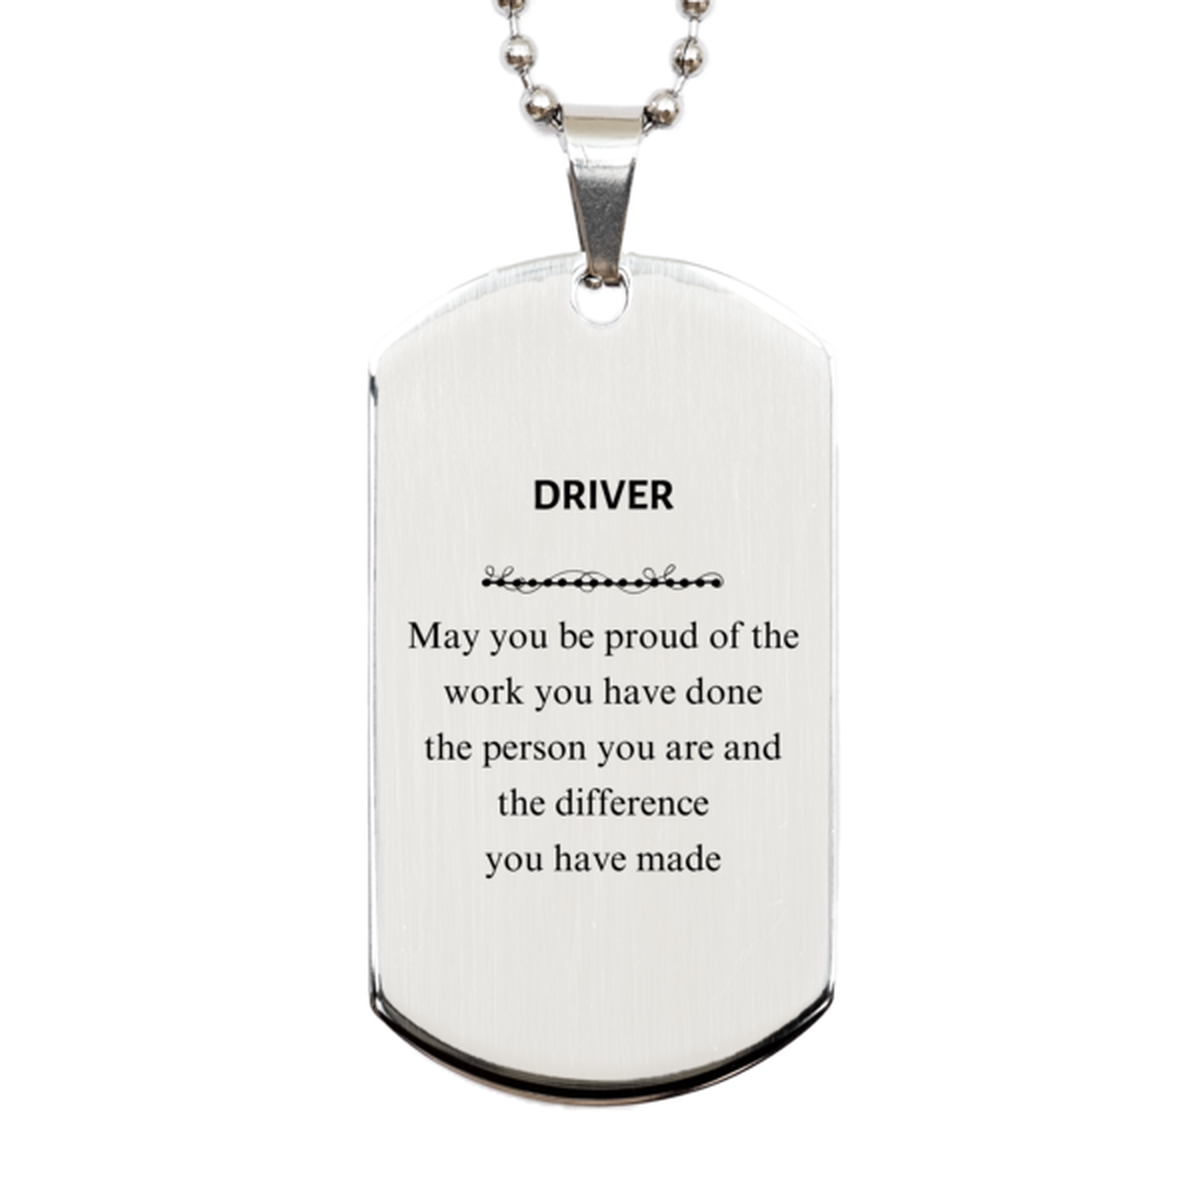 Driver May you be proud of the work you have done, Retirement Driver Silver Dog Tag for Colleague Appreciation Gifts Amazing for Driver